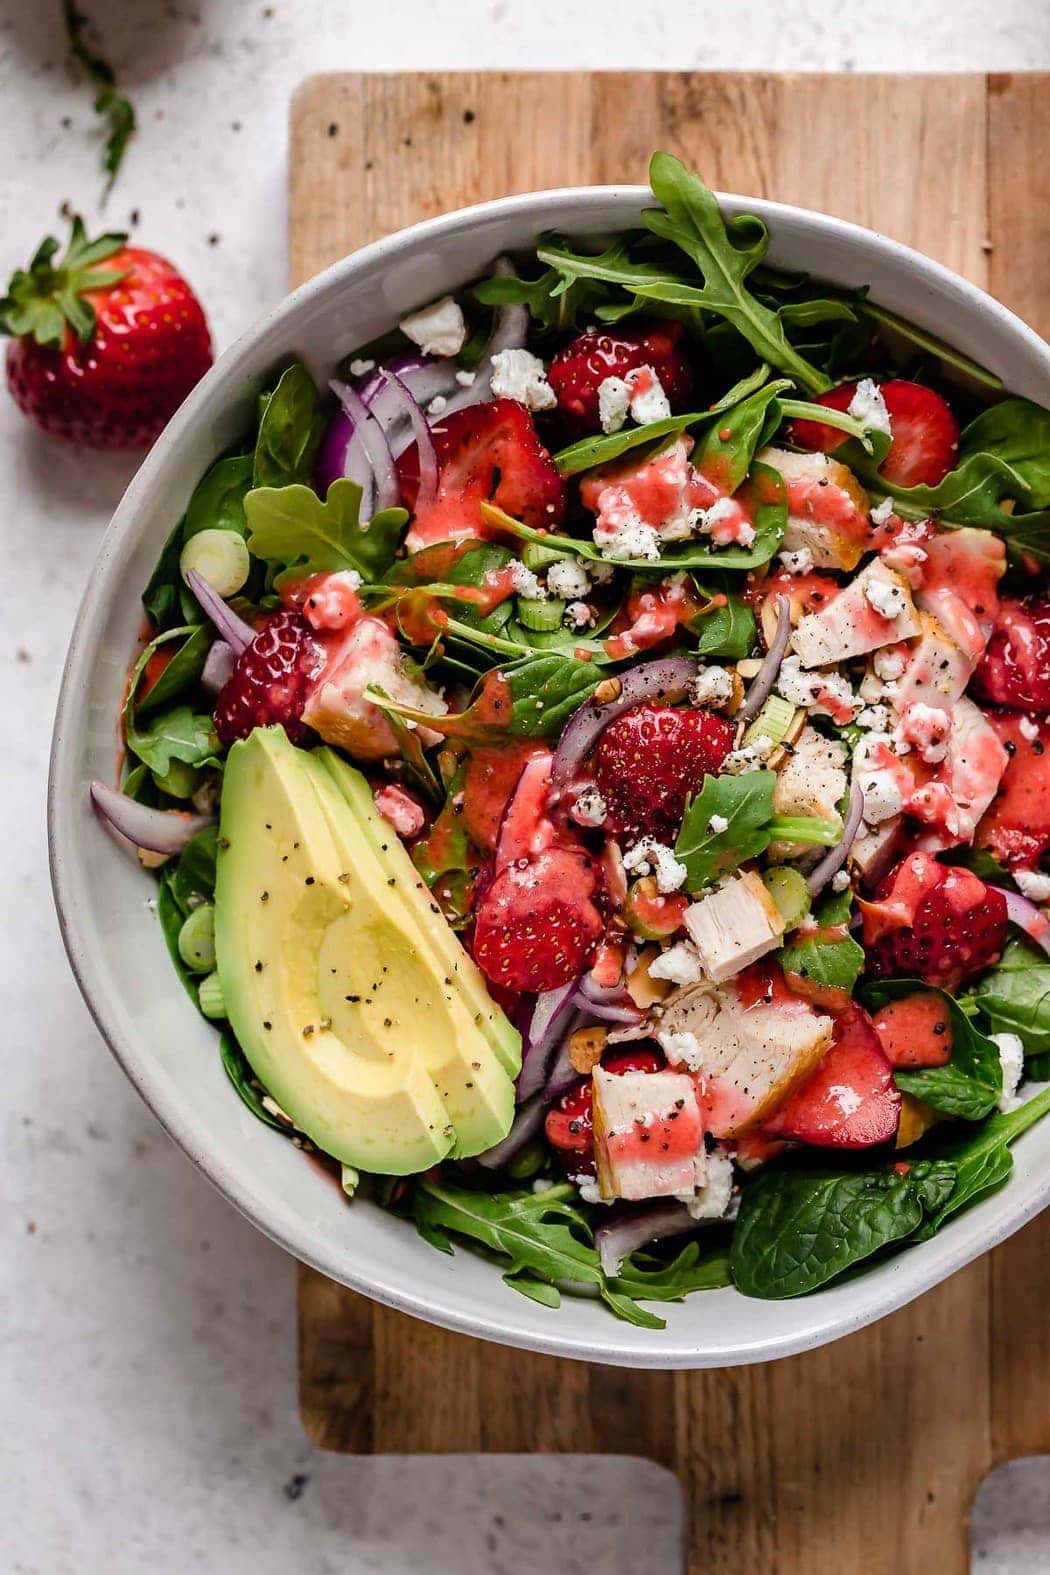 Gorgeous overhead shot of Strawberry Spinach Salad with Chicken in a white bowl. Ingredients include greens, sliced strawberries, chunks of chicken, goat cheese crumbles, avocado slices and red onion slices. 